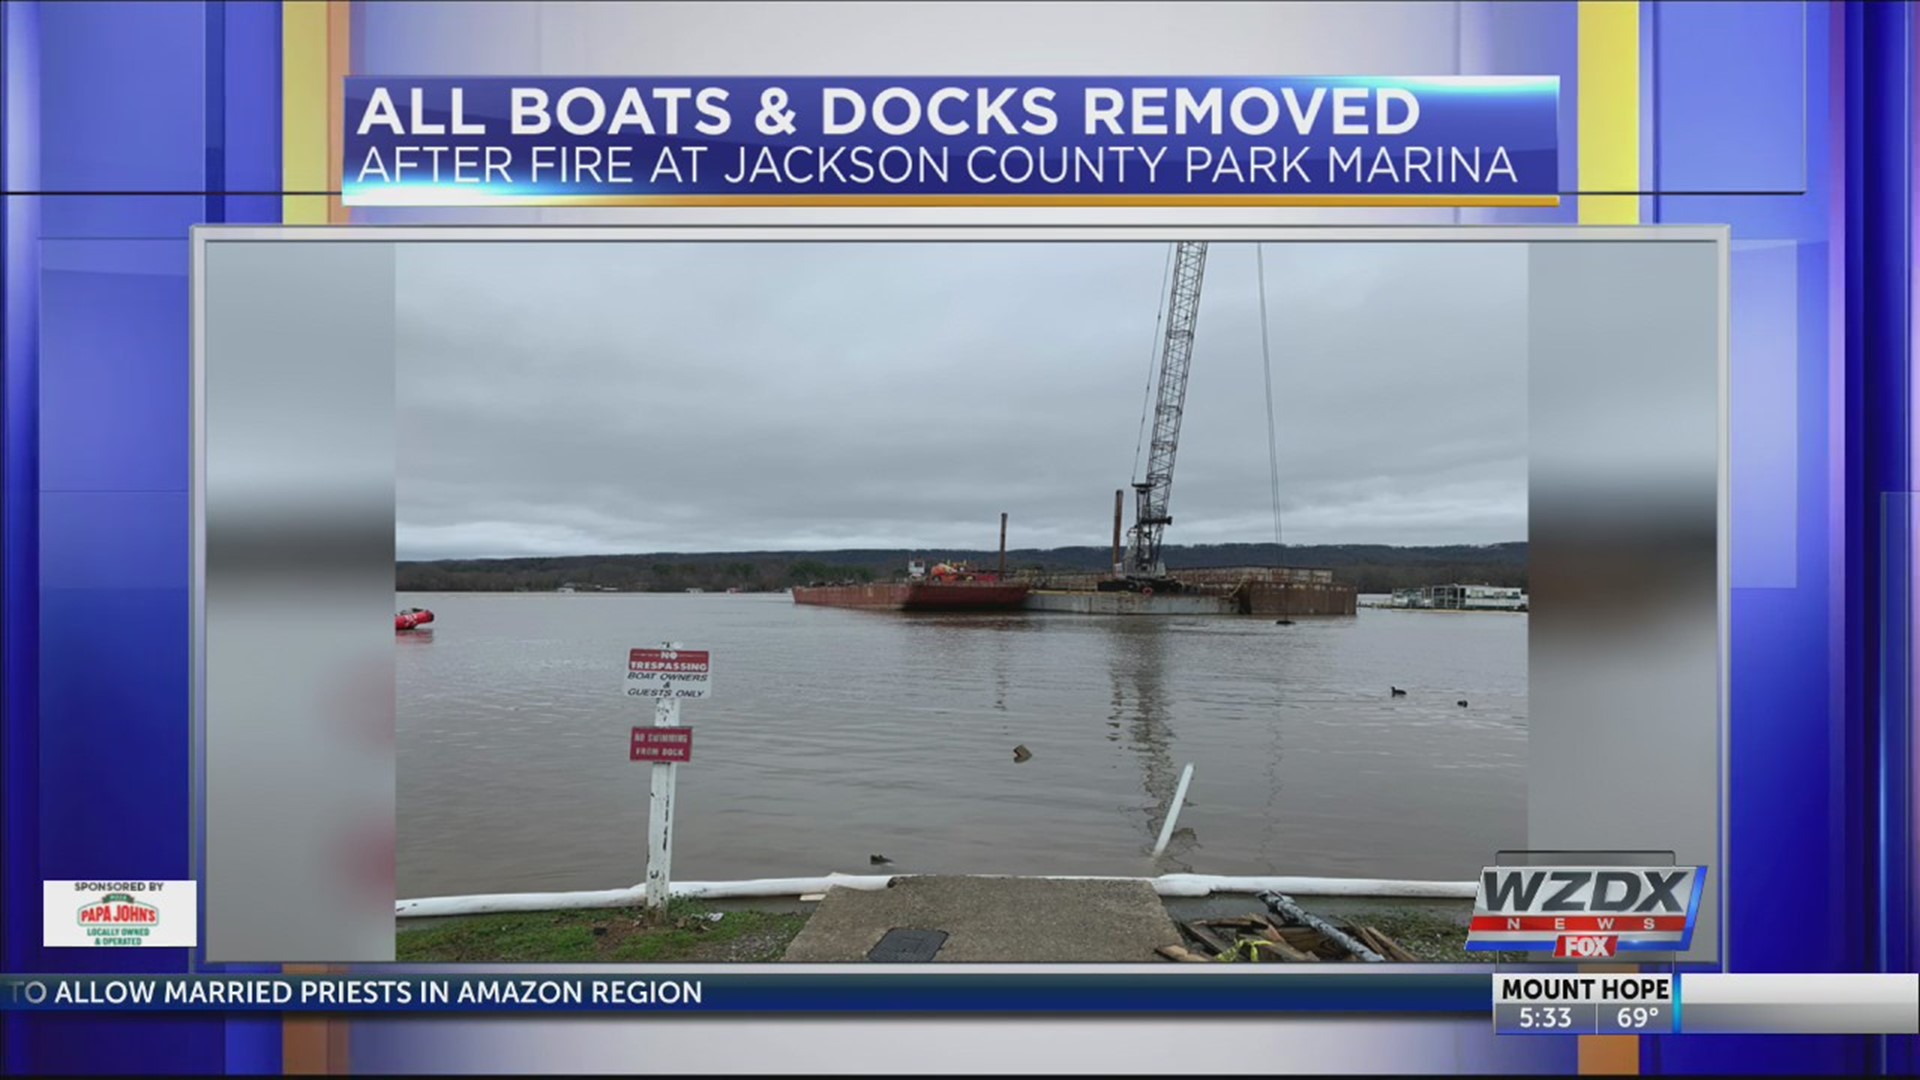 It’s been just over two weeks since eight people were killed in the massive fire at the Jackson County Park Marina in Scottsboro. As of Tuesday, February 12th – Jackson County EMA says they have removed all of the boats and docks from the water. Over 35 boats were destroyed in the blaze.